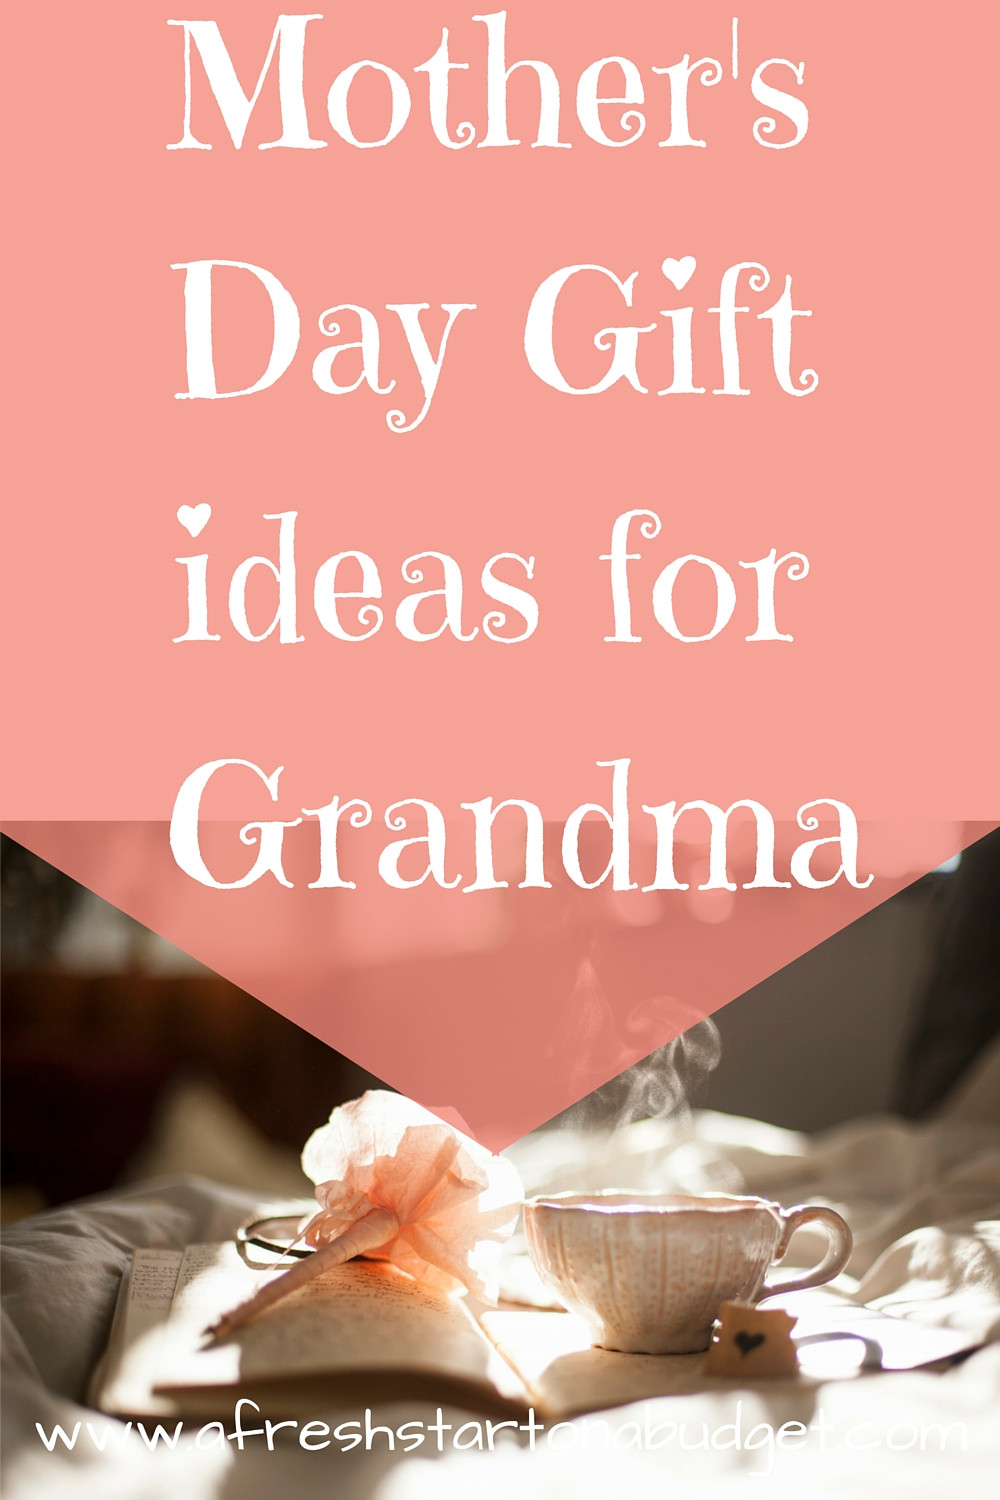 Mothers Day Gift Ideas For Grandma
 Mother s Day Gift ideas for Grandma A Fresh Start on a